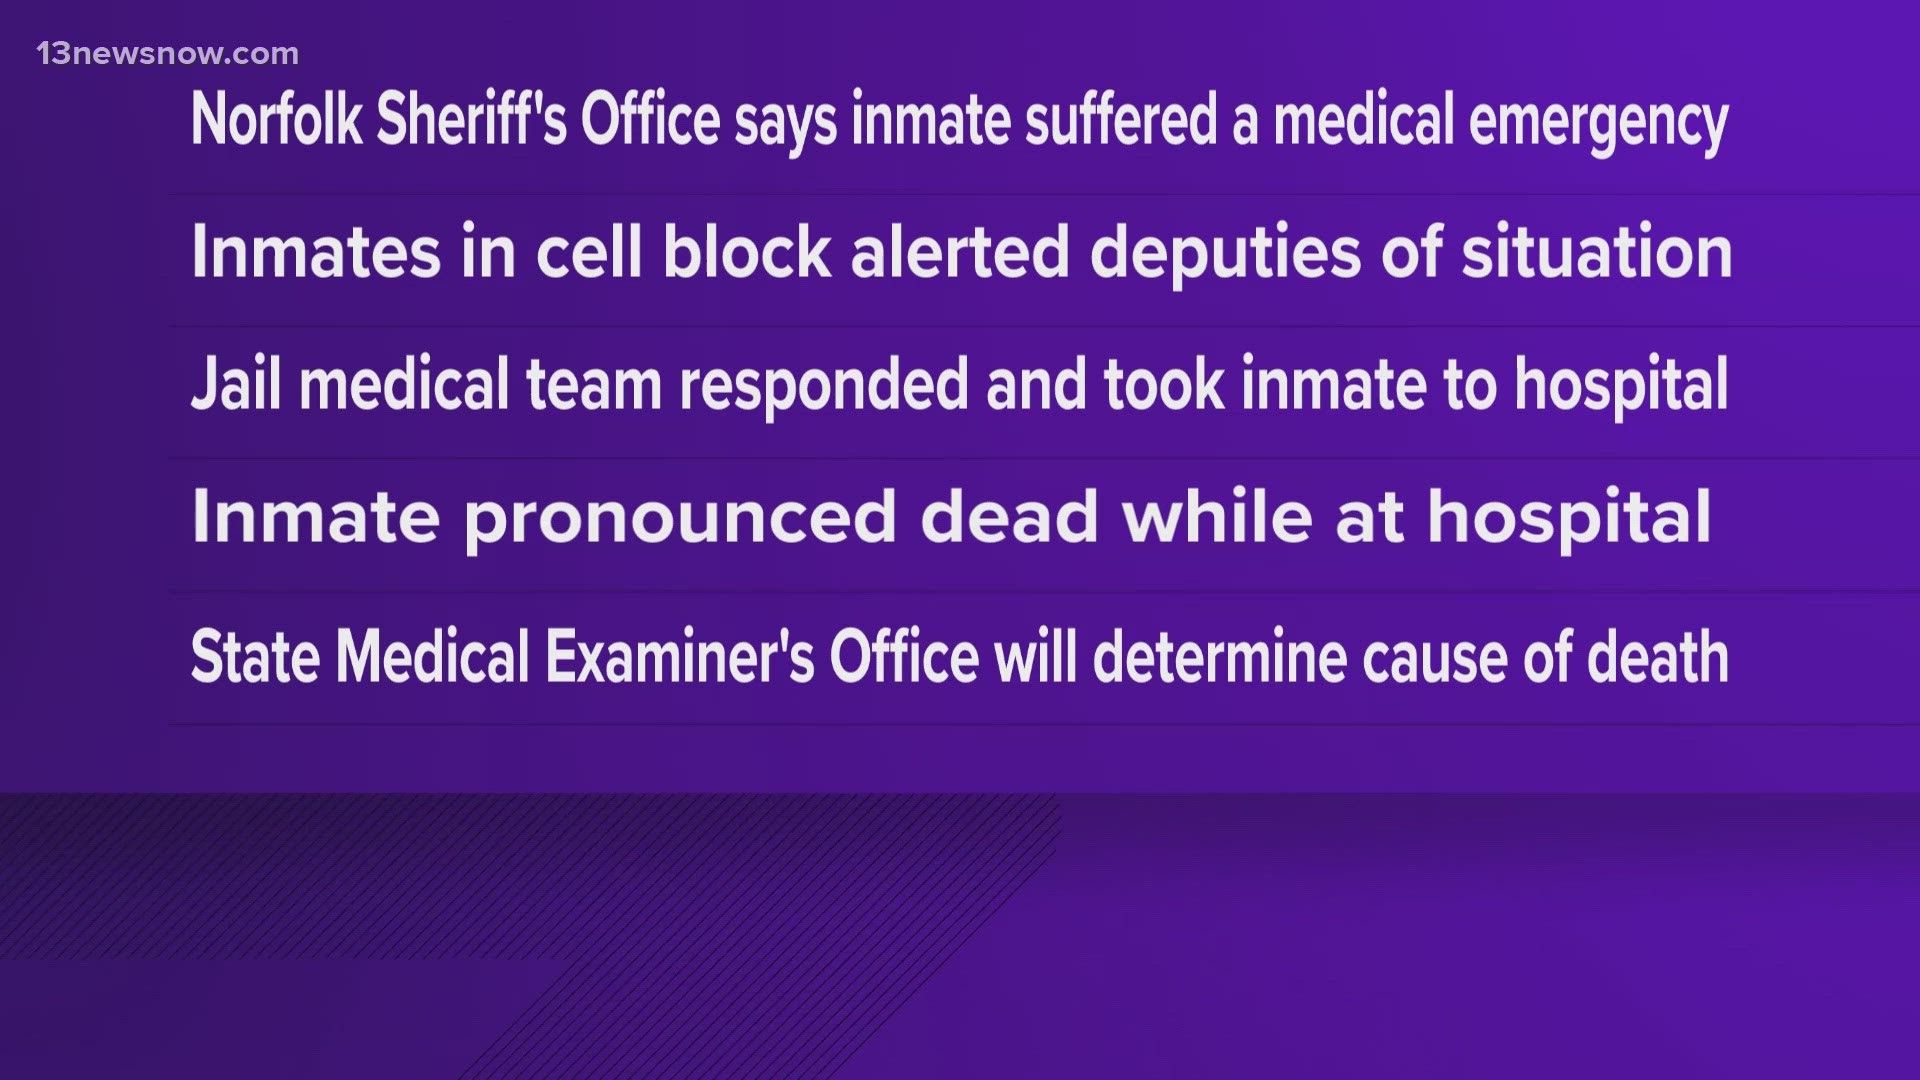 An investigation revealed that the inmate had a medical emergency while inside the jail, according to the Norfolk Sheriff's Office.